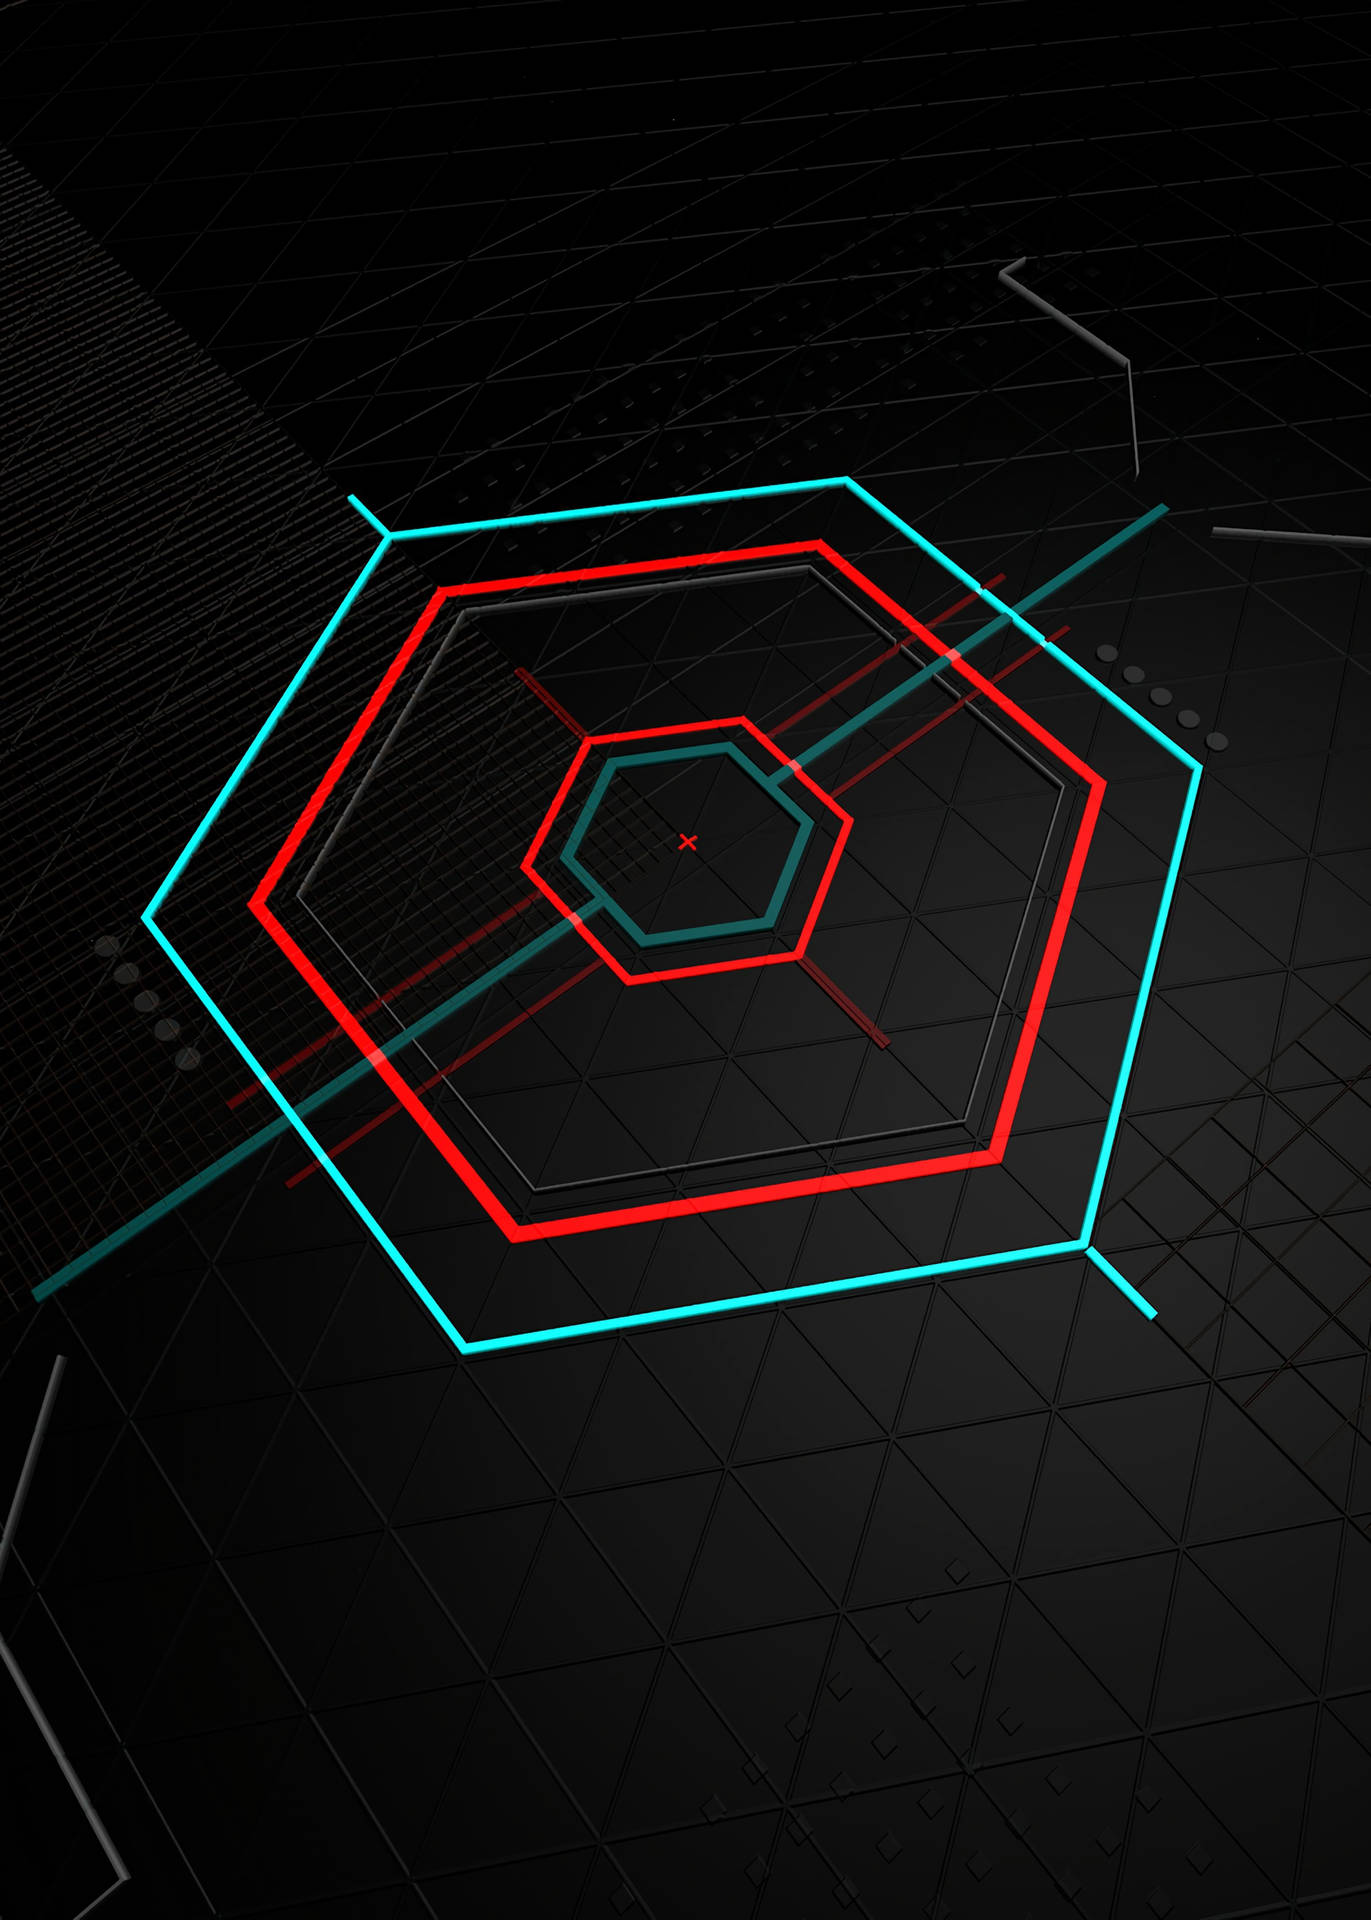 Hexagon 2400X3360 Wallpaper and Background Image